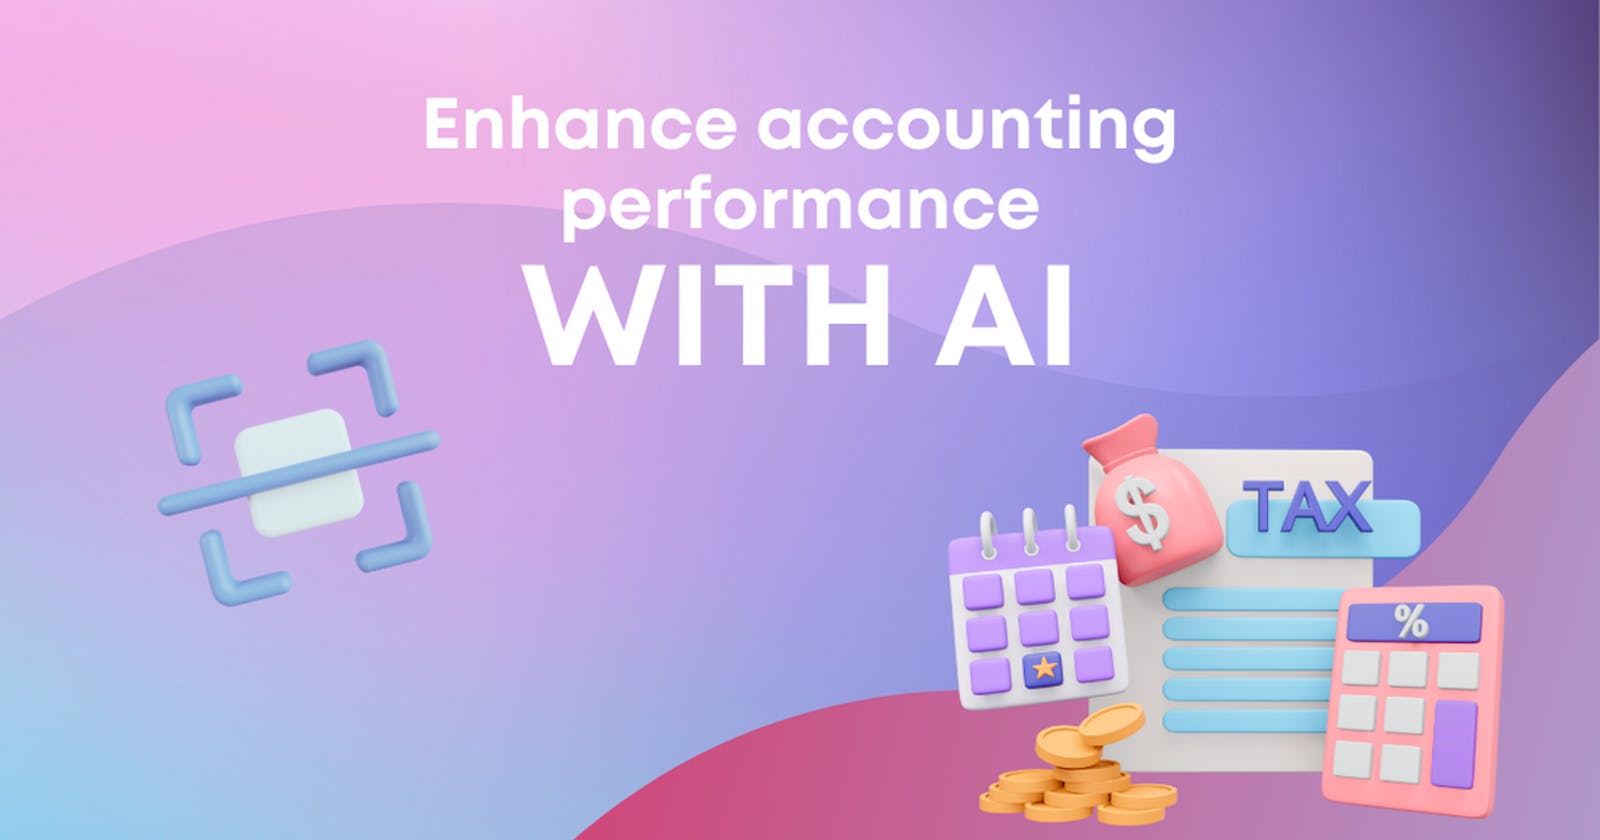 How to increase accounting performance with AI?